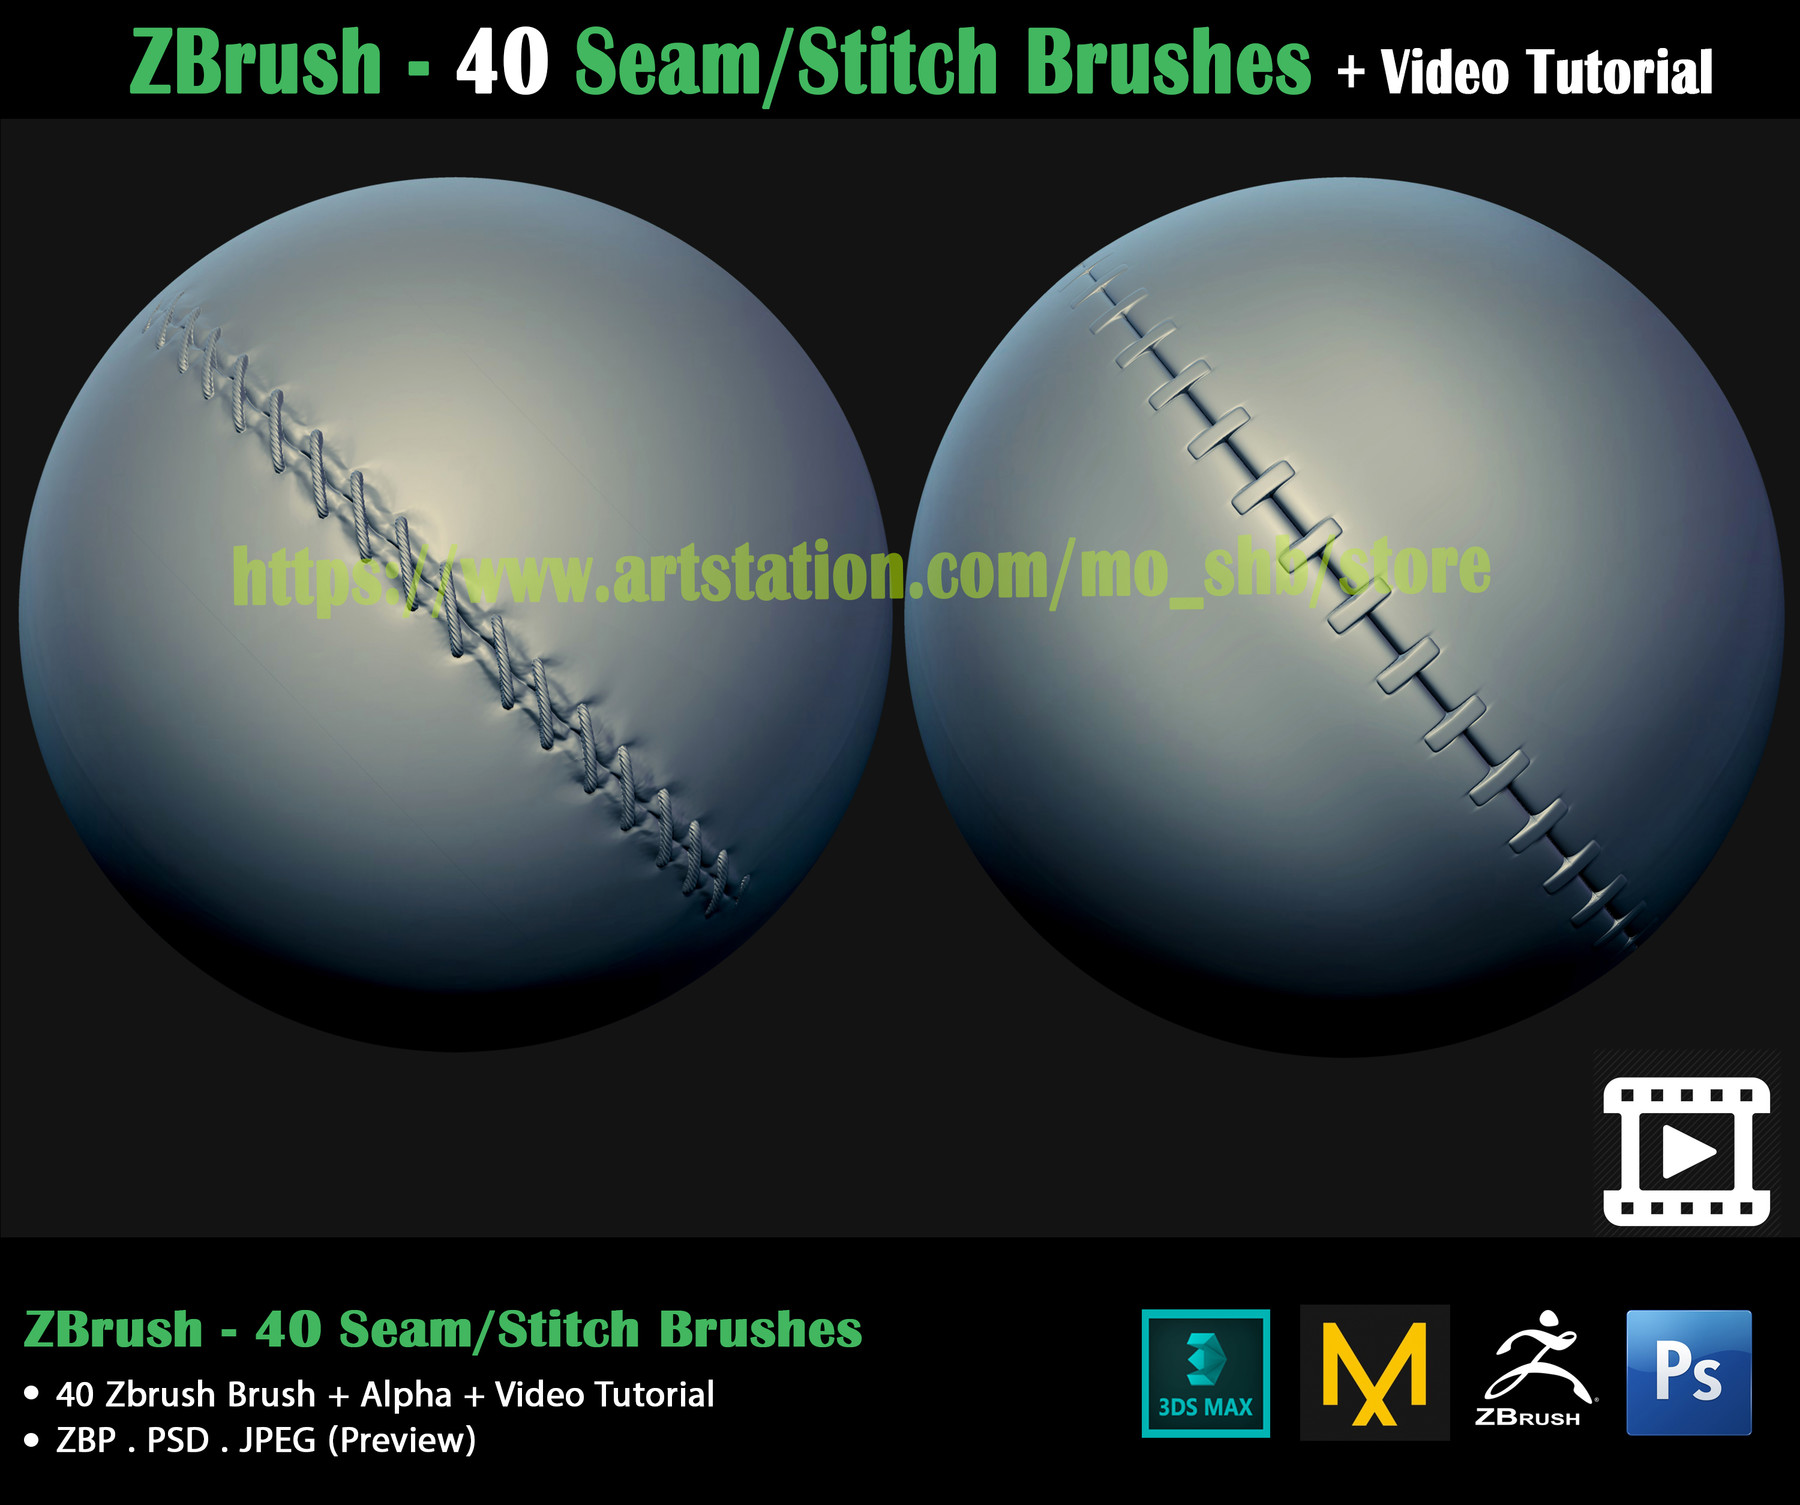 jean_stich.zbp brush zbrush